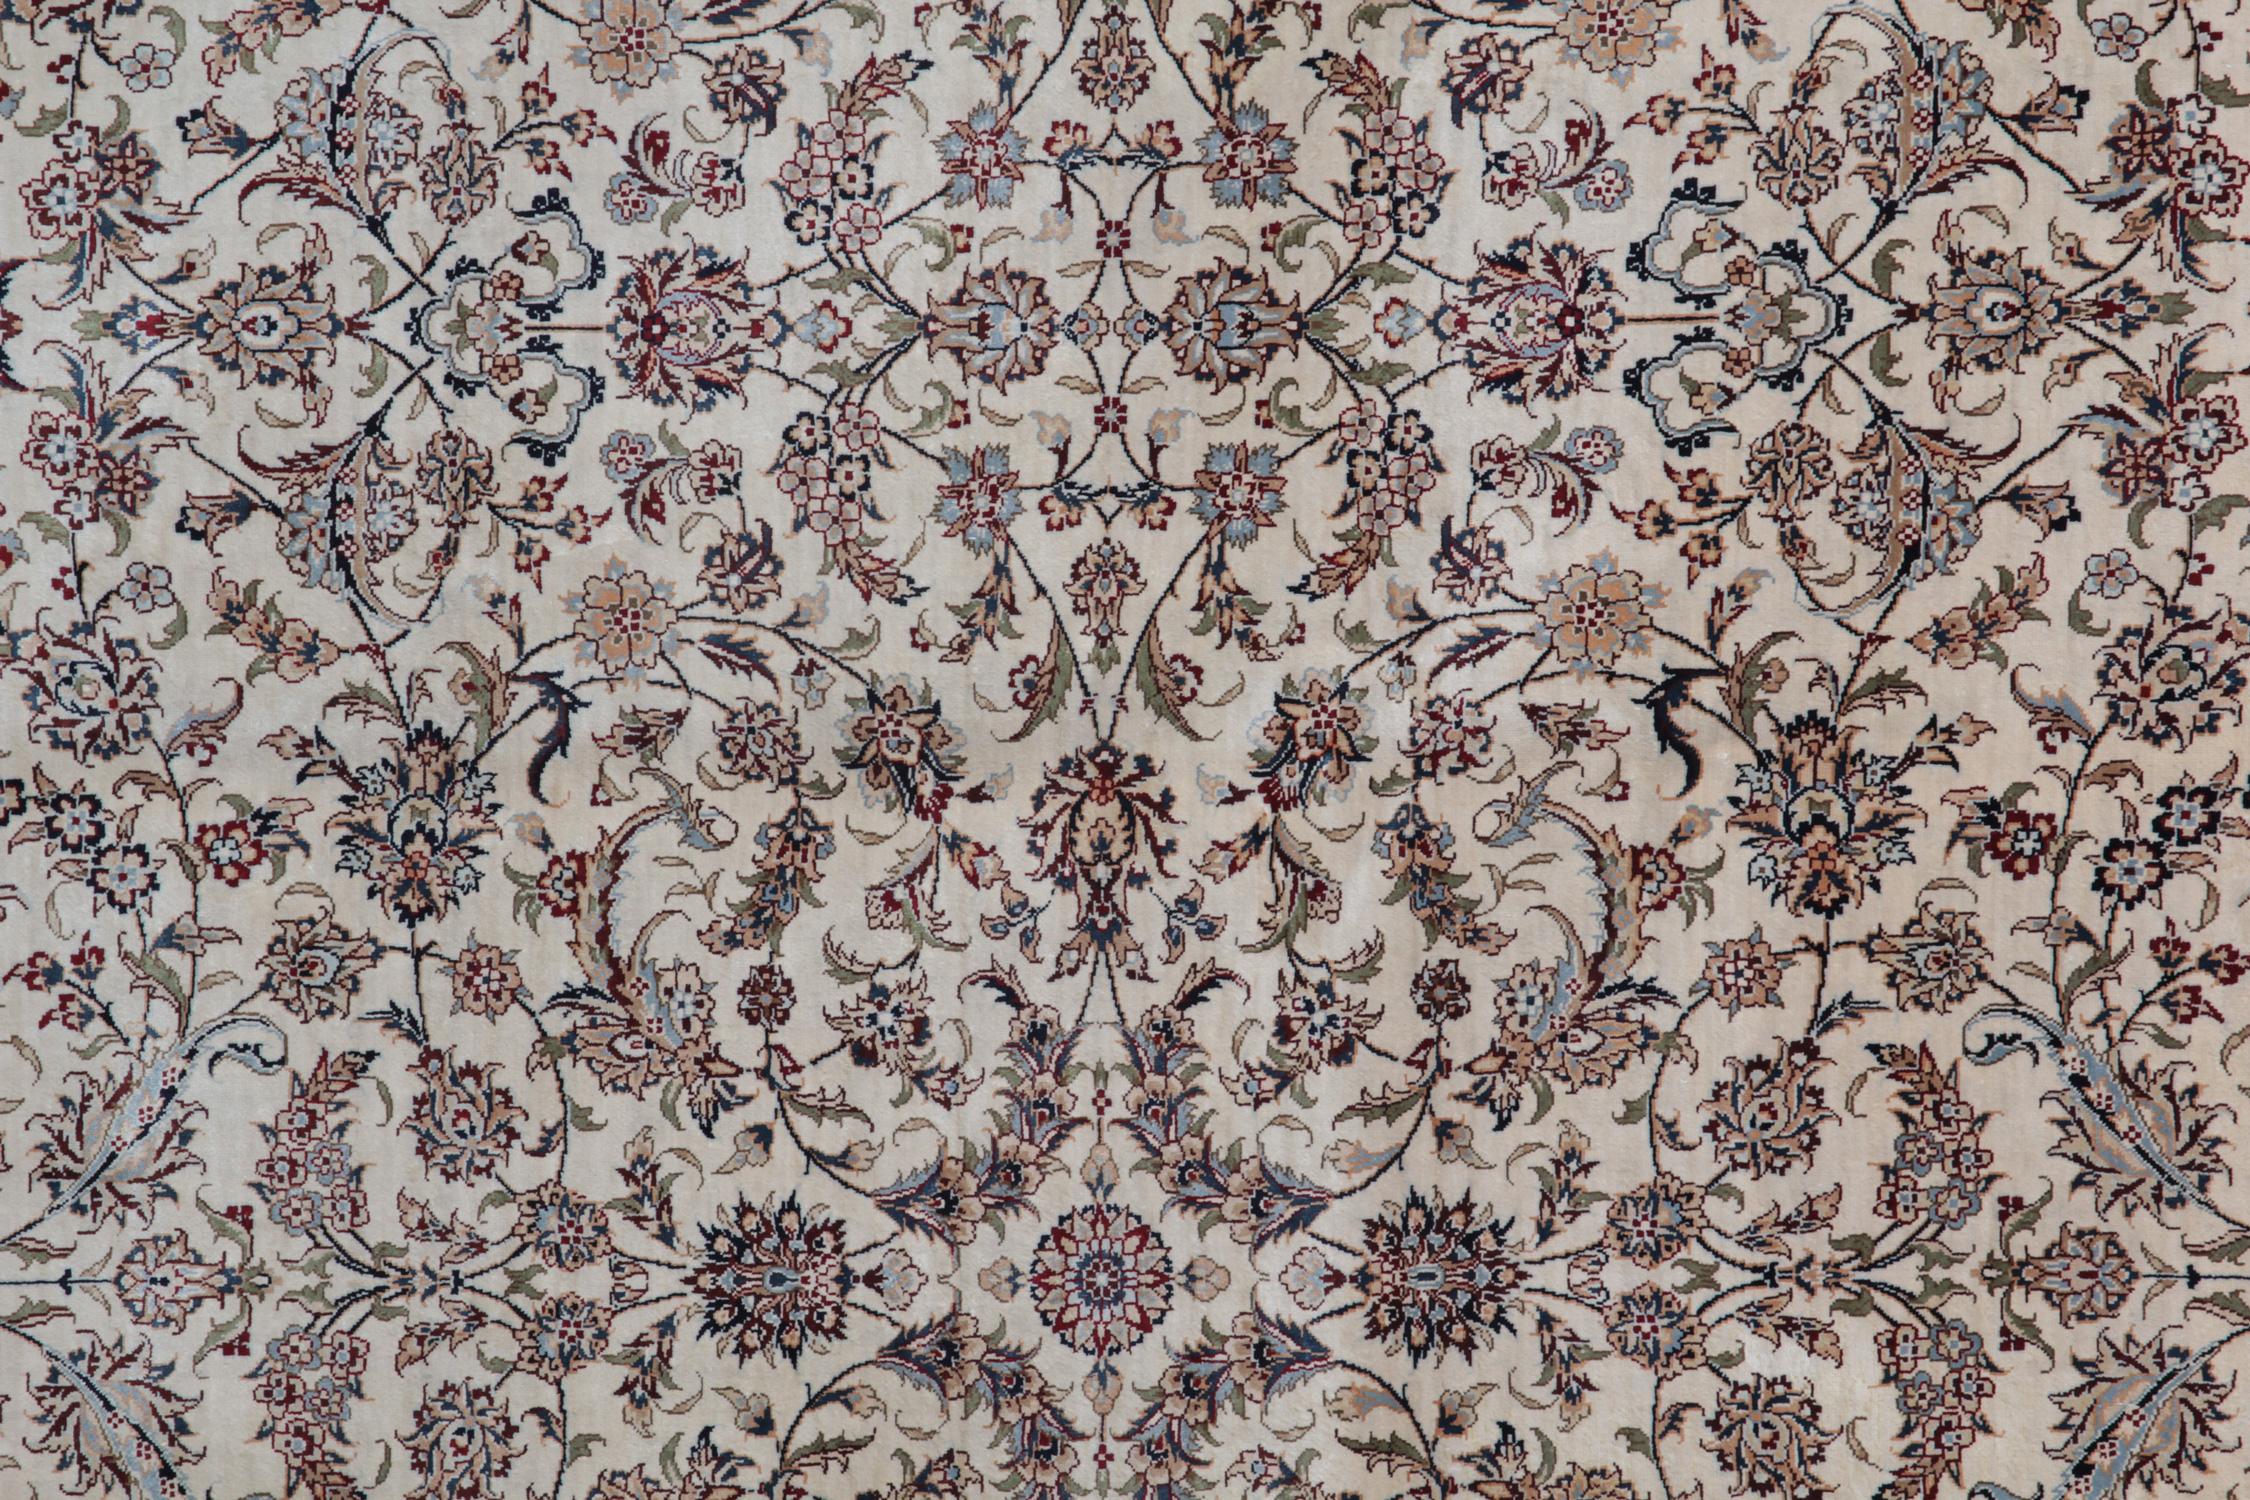 This cream rug is a fine Chinese carpet with all-over rug design and highest quality natural rugs made of organic pure silk and vegetable dyes. The colour palette is a combination of grey rug tones. Highly recommended by the interior designers as